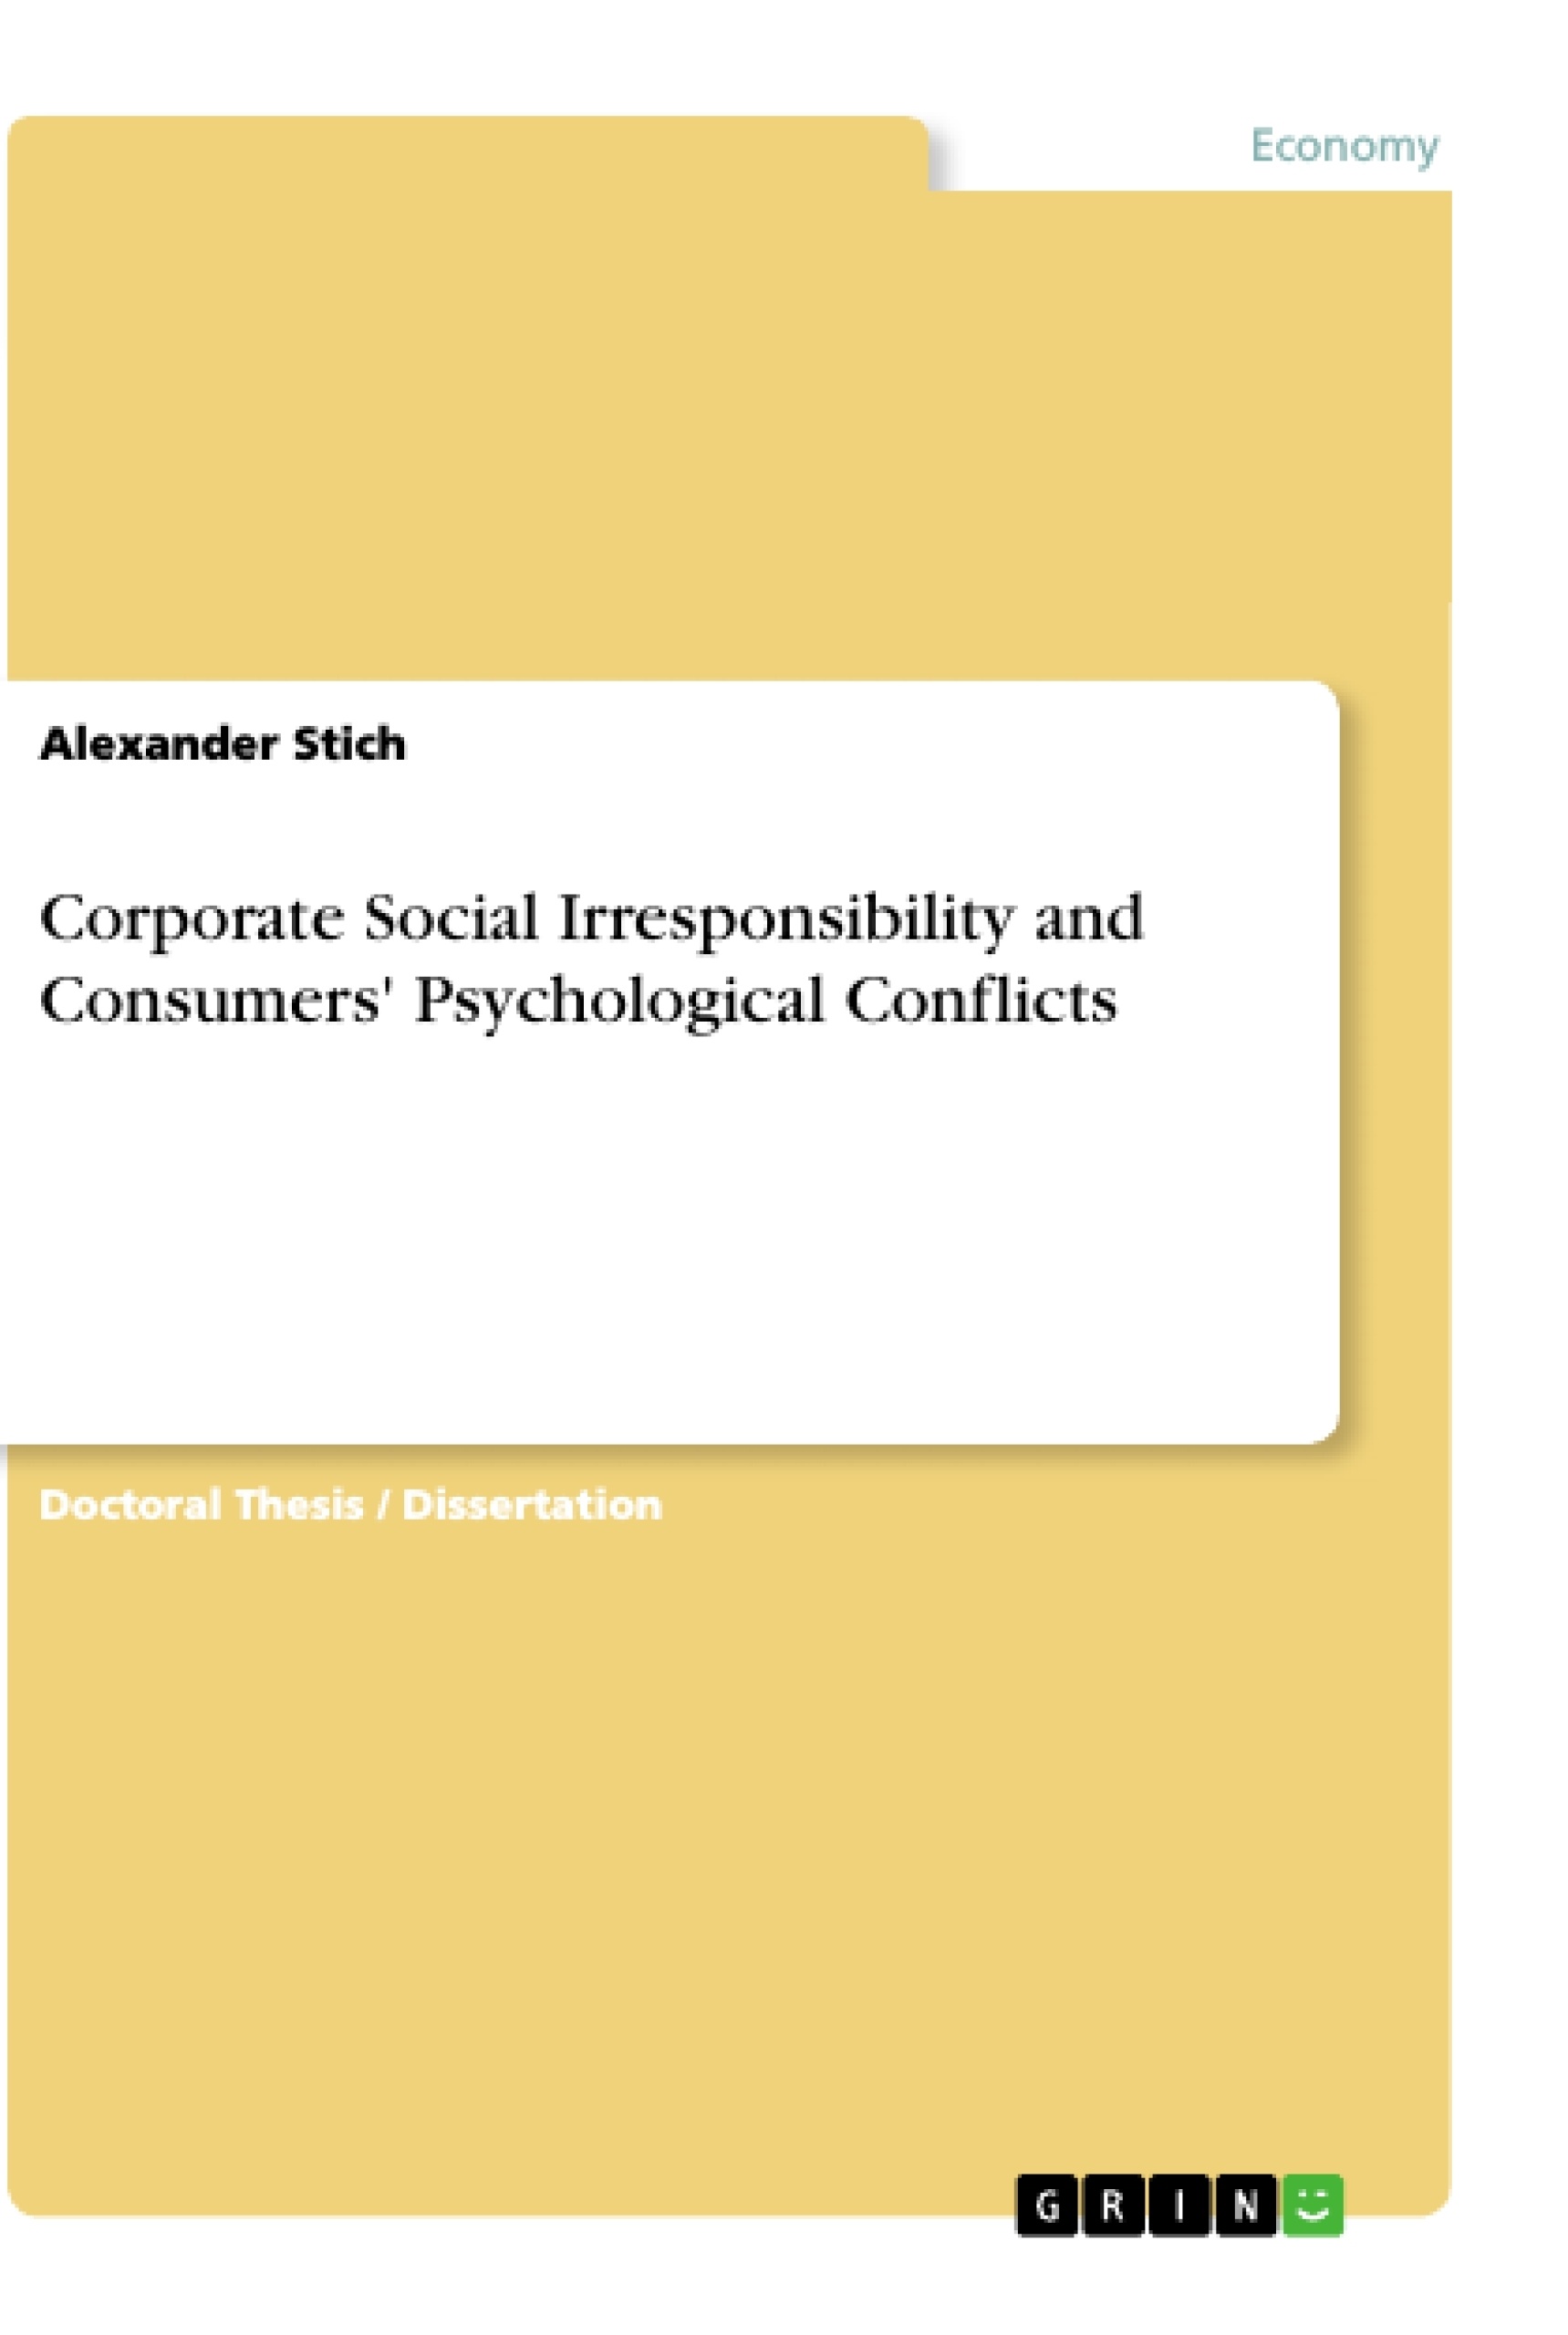 Titel: Corporate Social Irresponsibility and Consumers' Psychological Conflicts